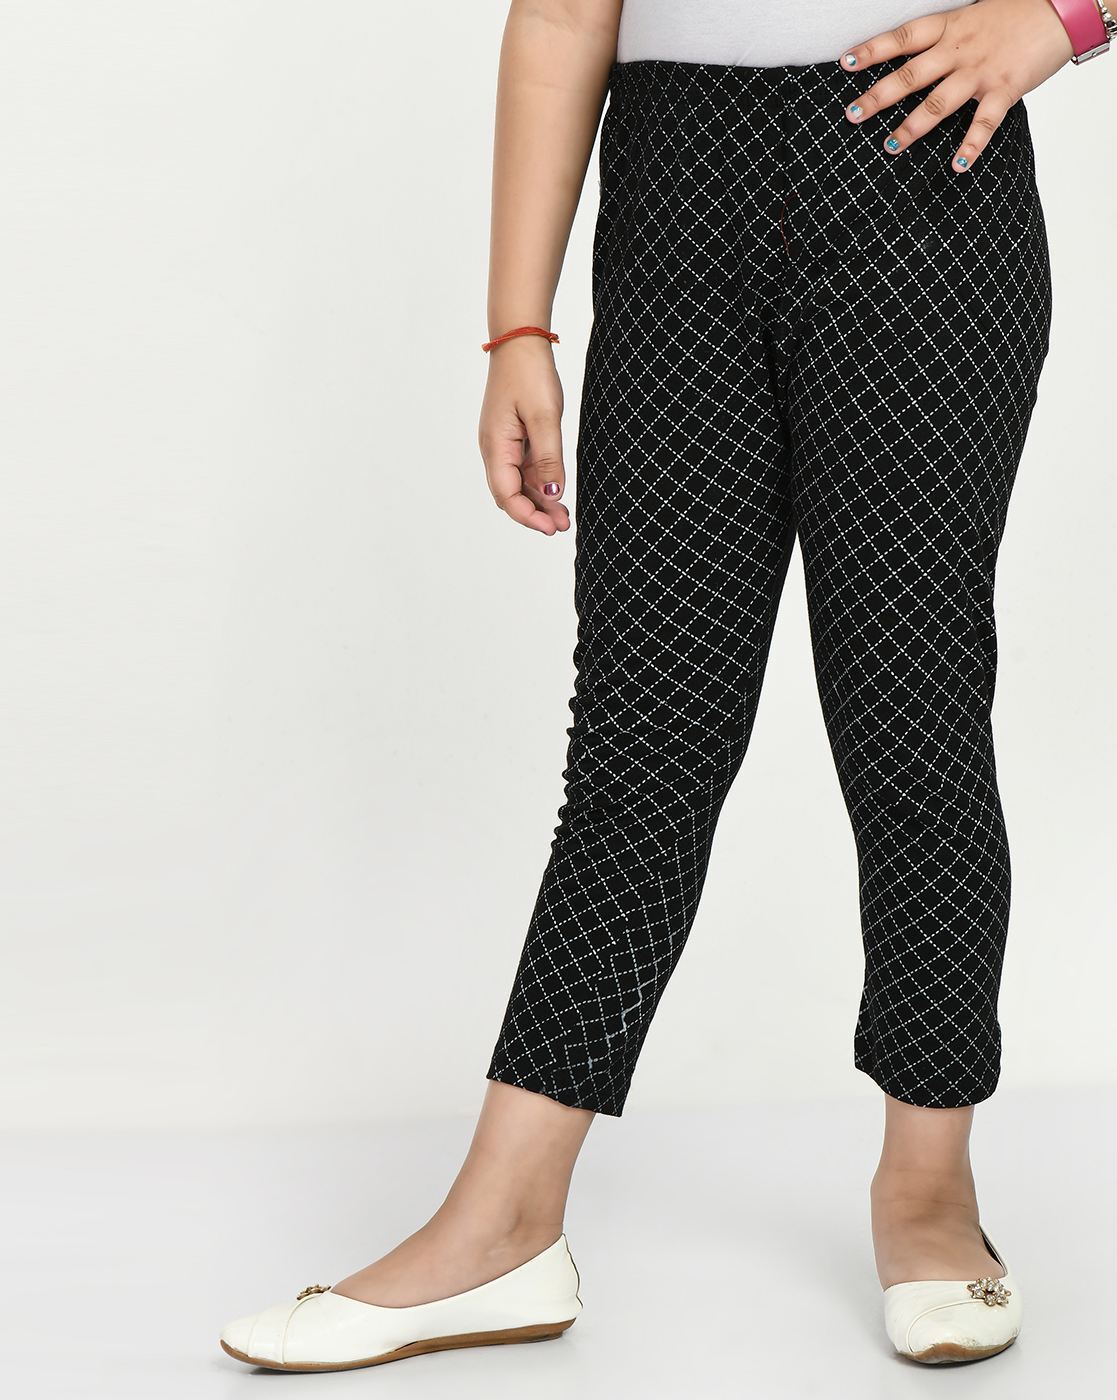 Buy Black & Yellow Trousers & Pants for Girls by INDIWEAVES Online